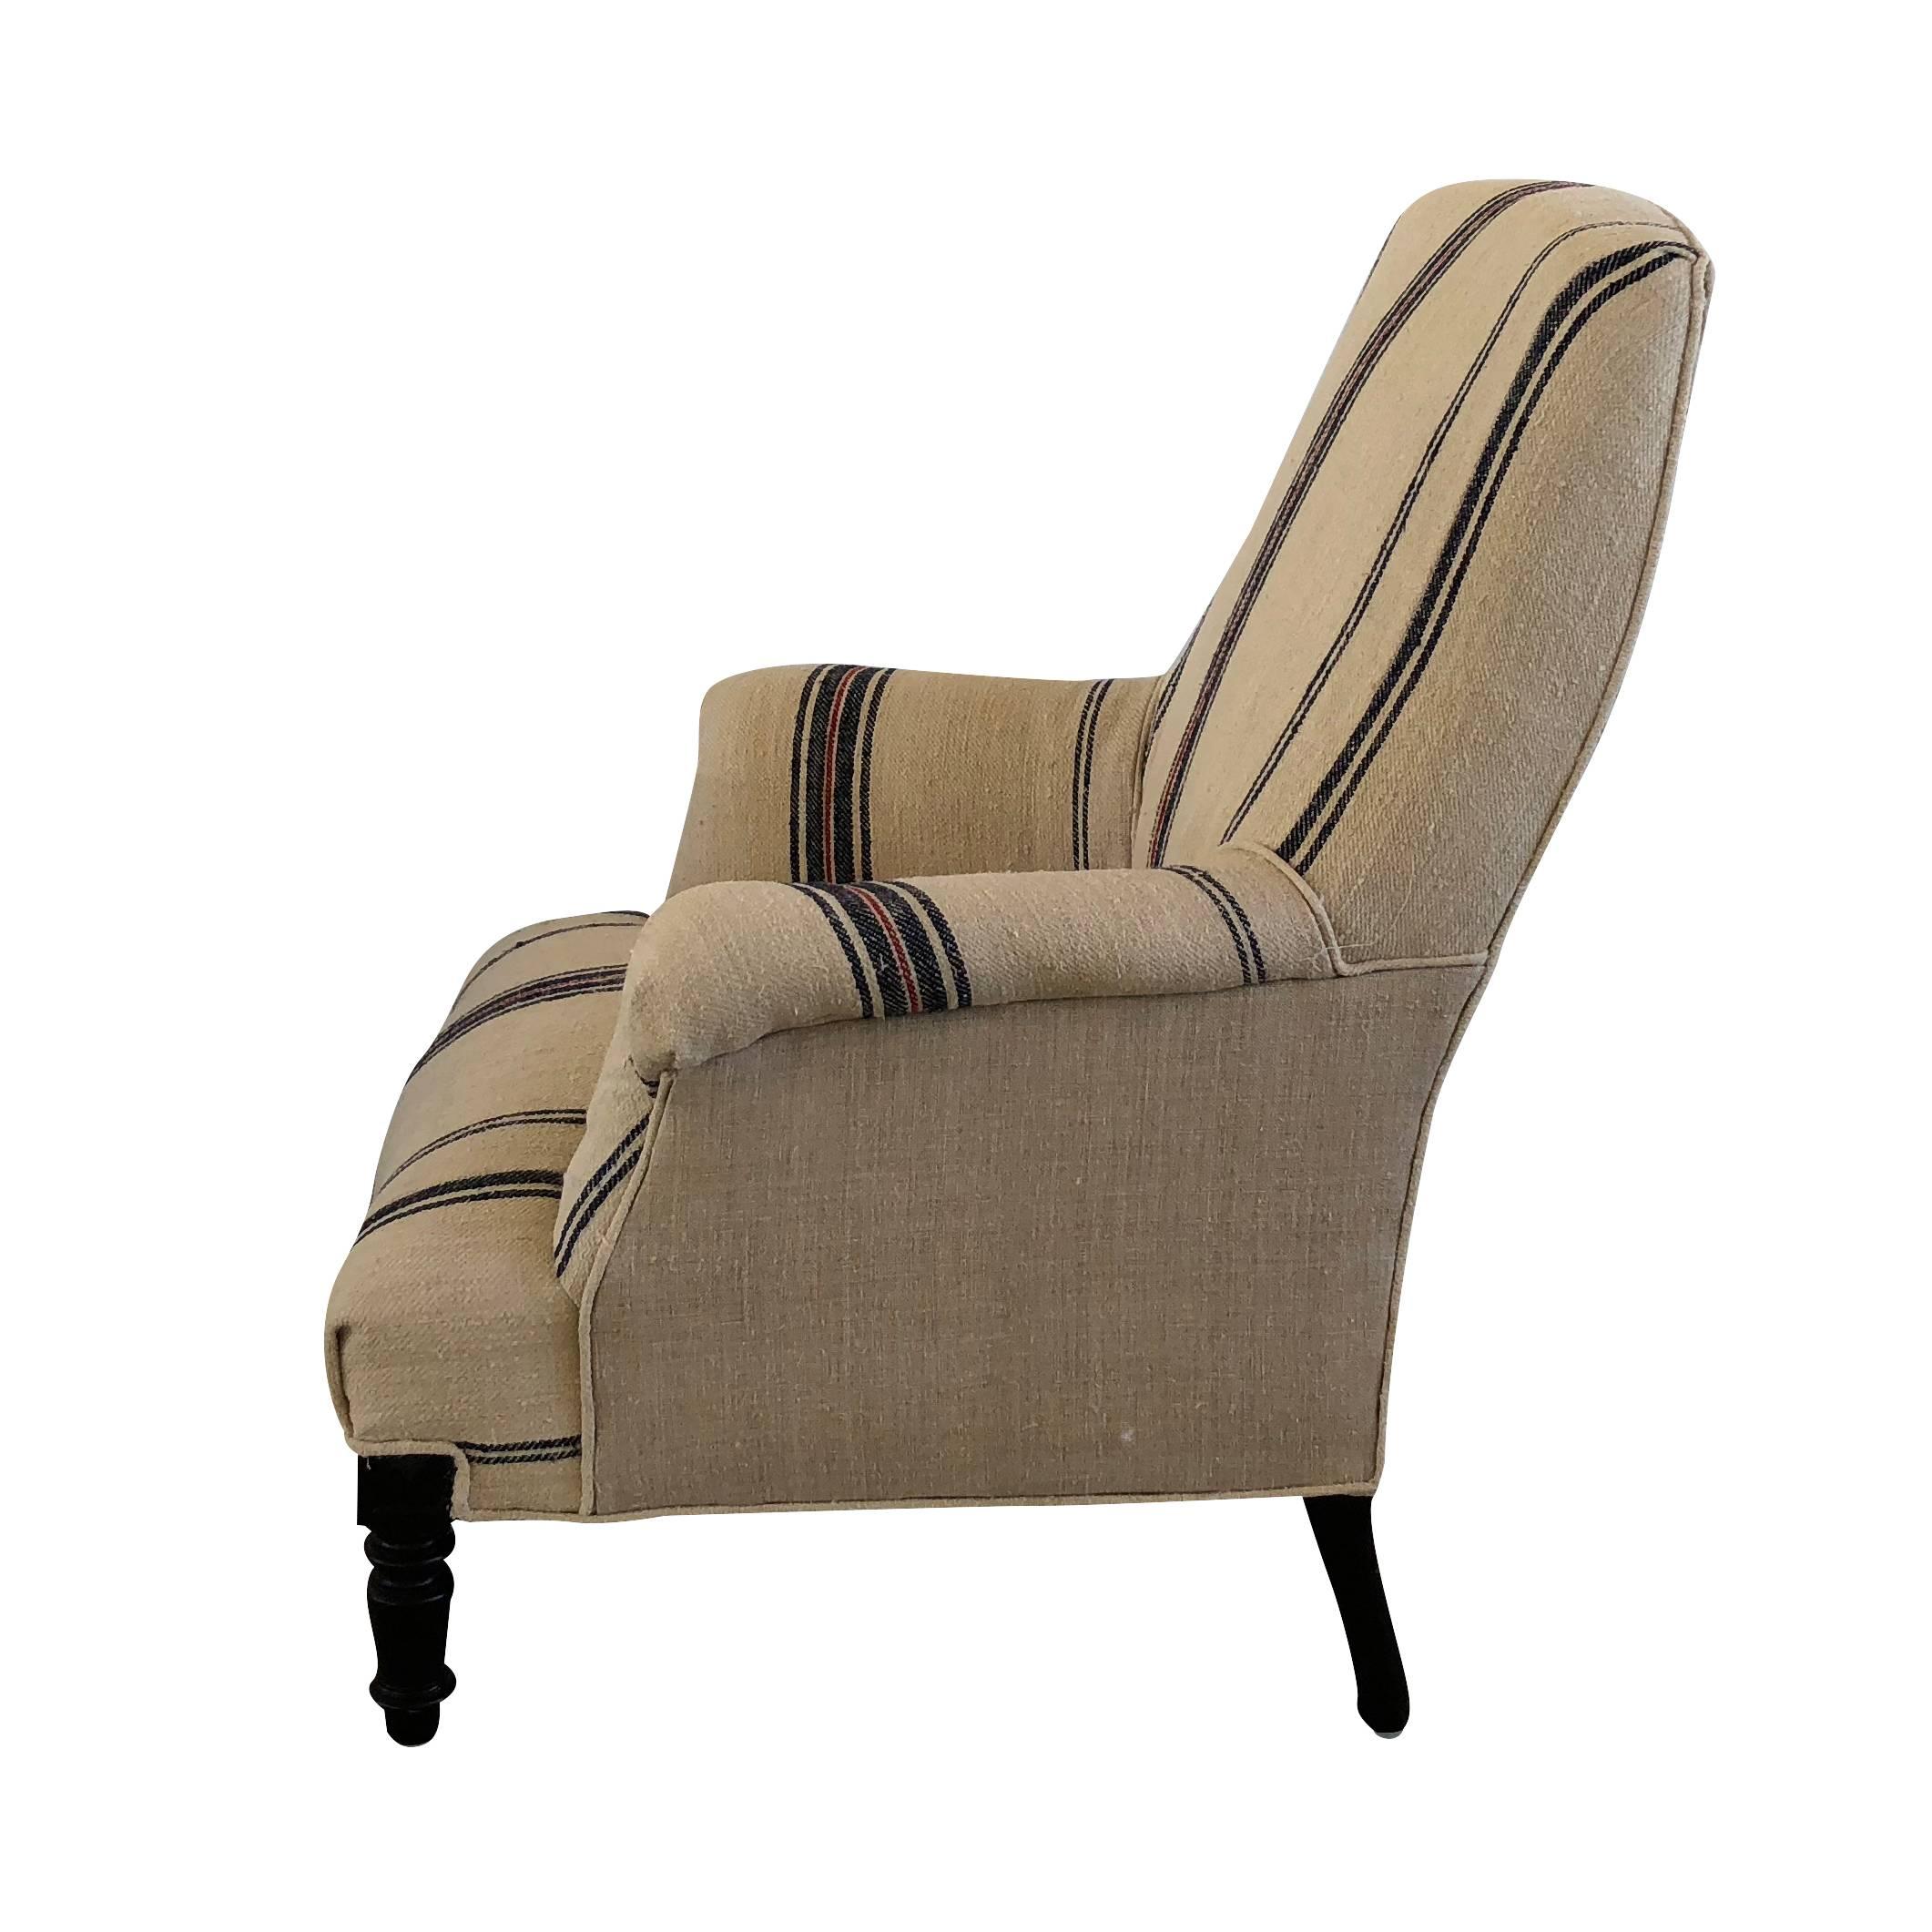 An antique Napoleon III Fauteuil, the French side chair is newly reupholstered in an antique hemp fabric, standing on four small hand carded walnut feet, in good condition. Wear consistent with age and use, circa 1860, Paris,